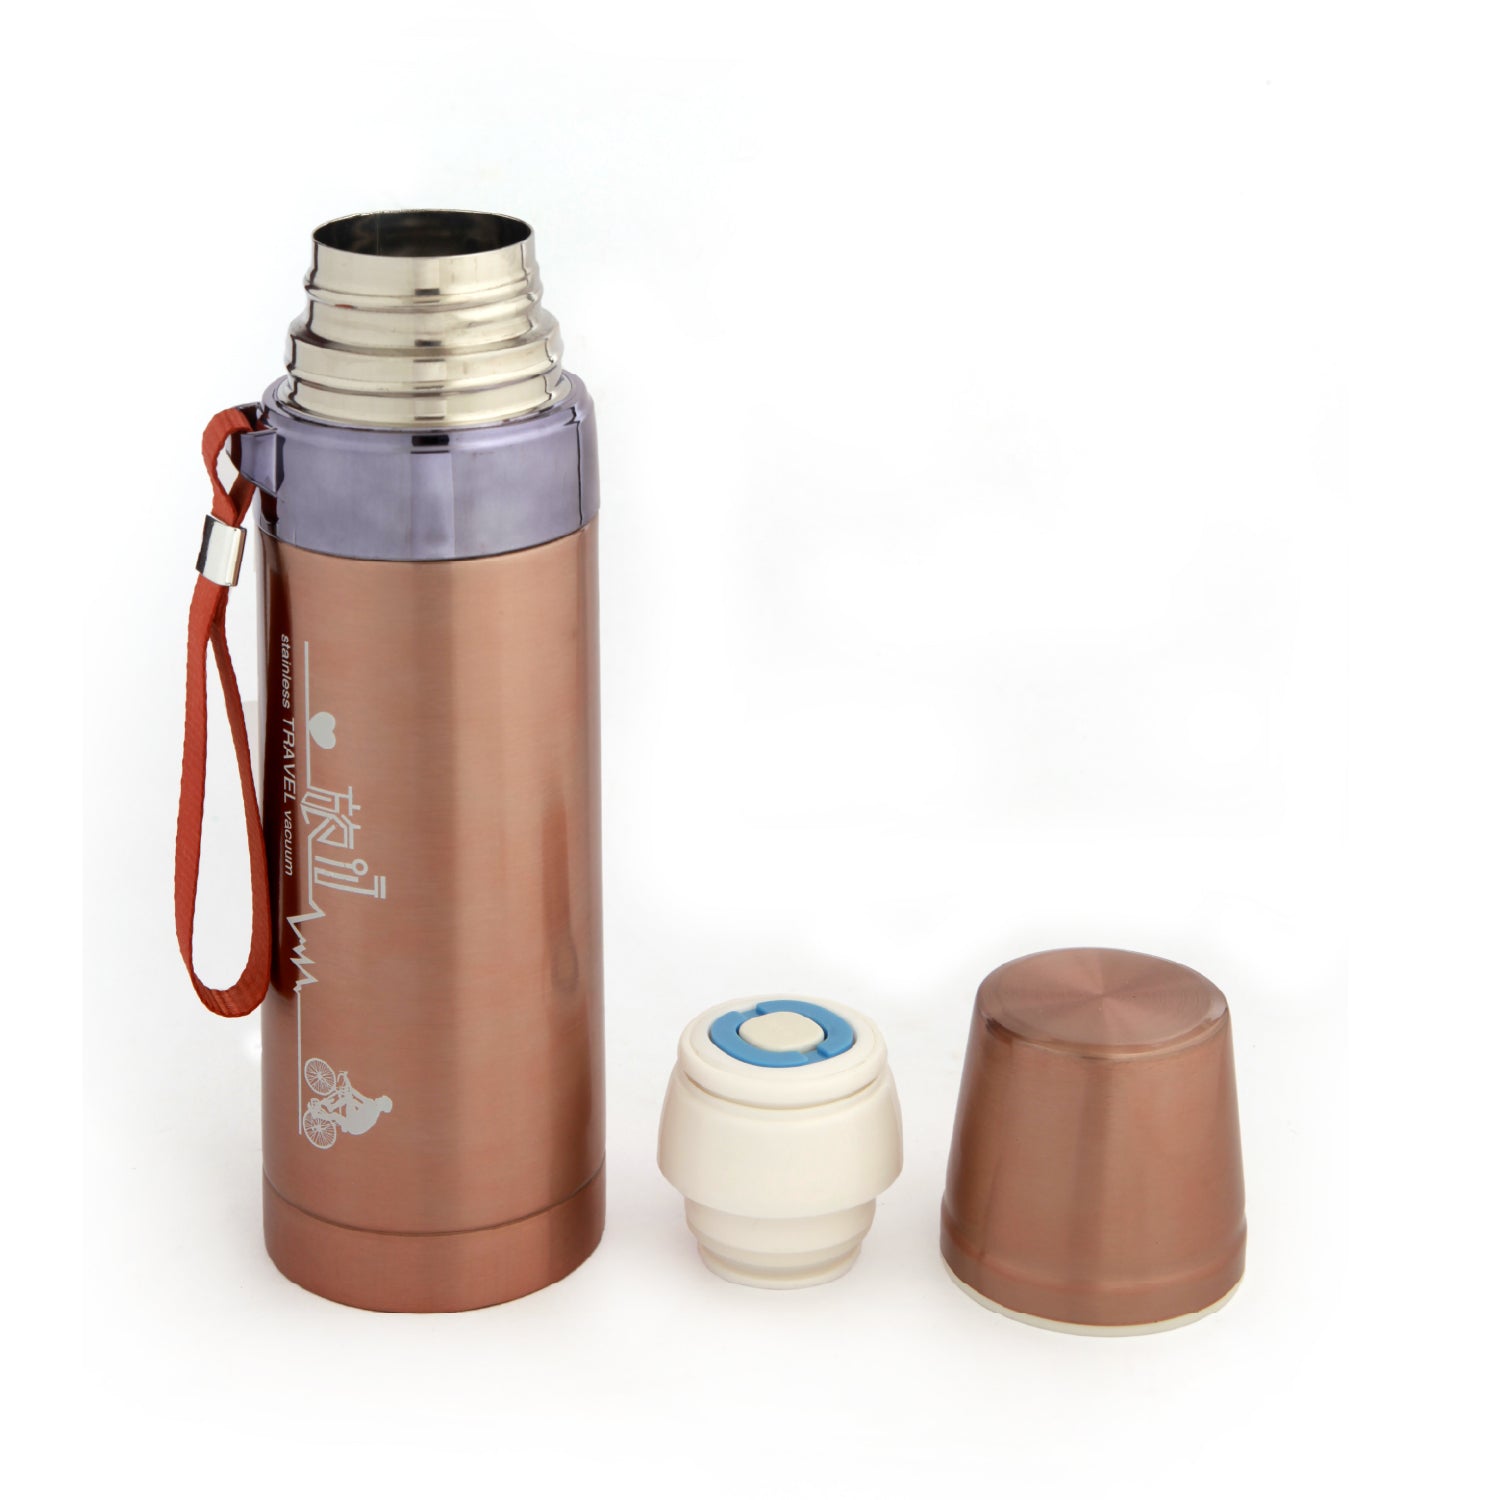 World Traveller Gold 800 ml Stainless Steel Flask - Baby Moo